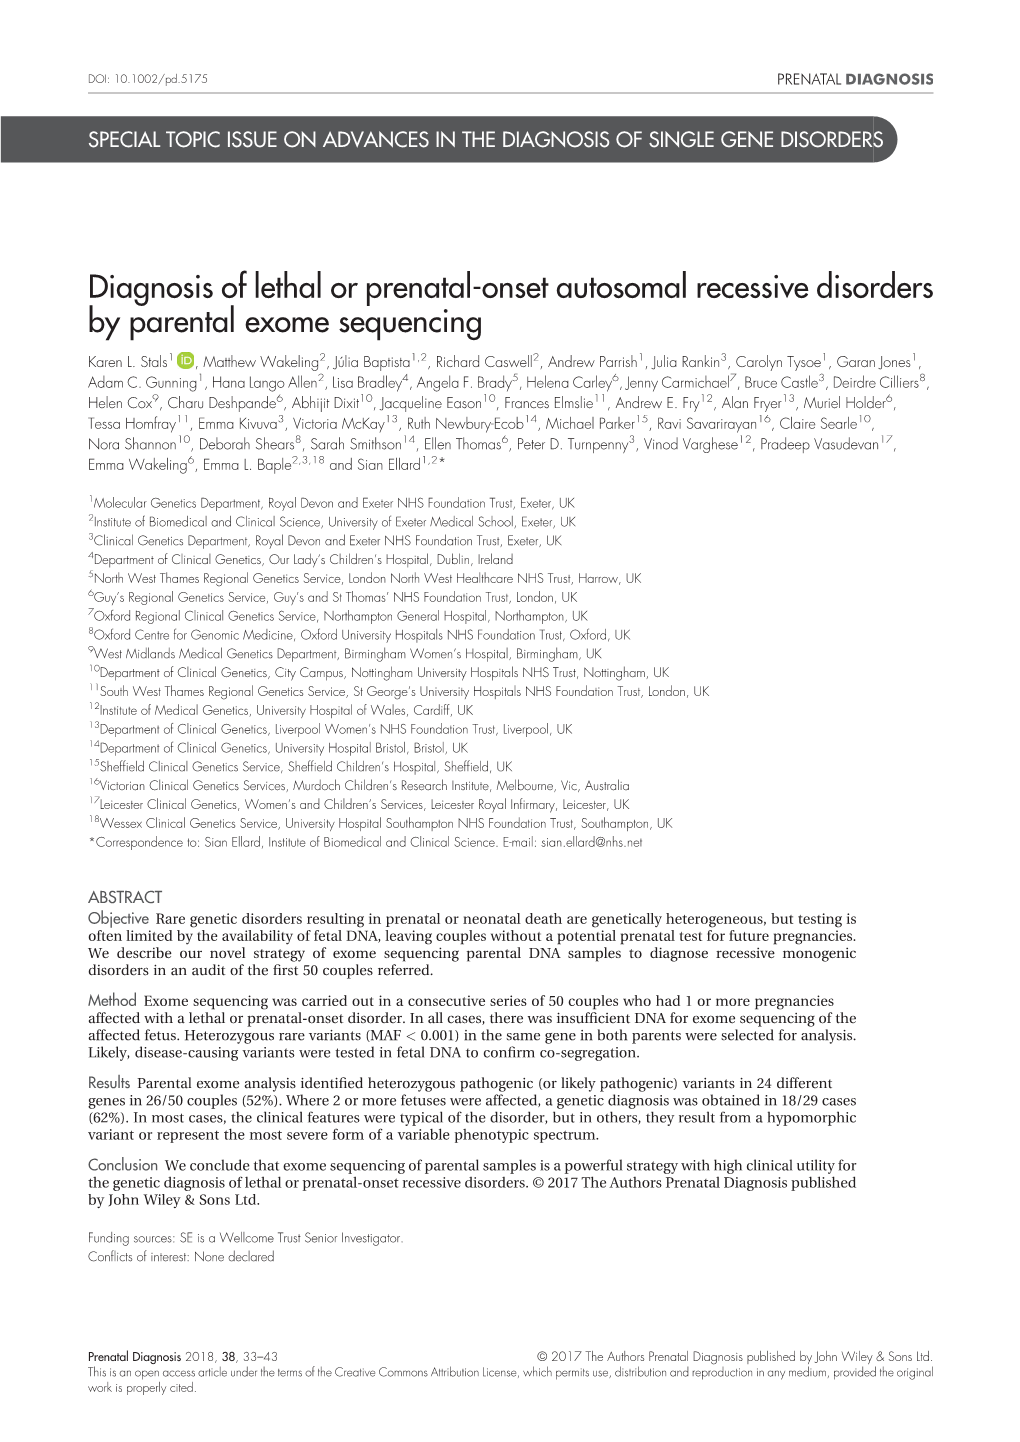 Diagnosis of Lethal Or Prenatal-Onset Autosomal Recessive Disorders by Parental Exome Sequencing